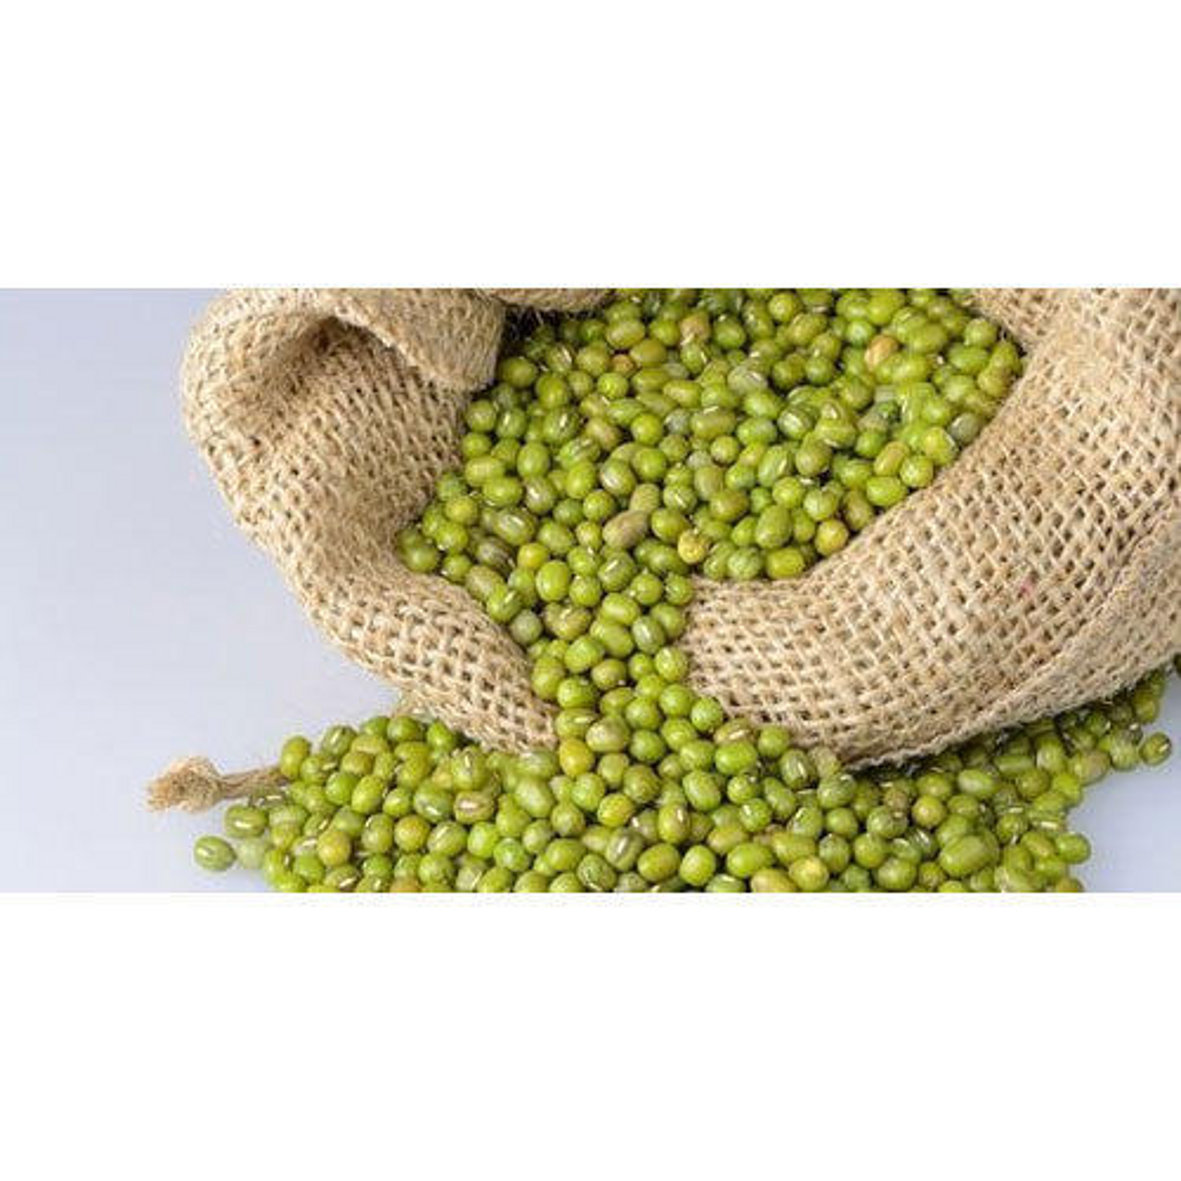 Now pulses will be available for cooking in schools too, 3658 quintals of moong will be supplied from 34800 bags